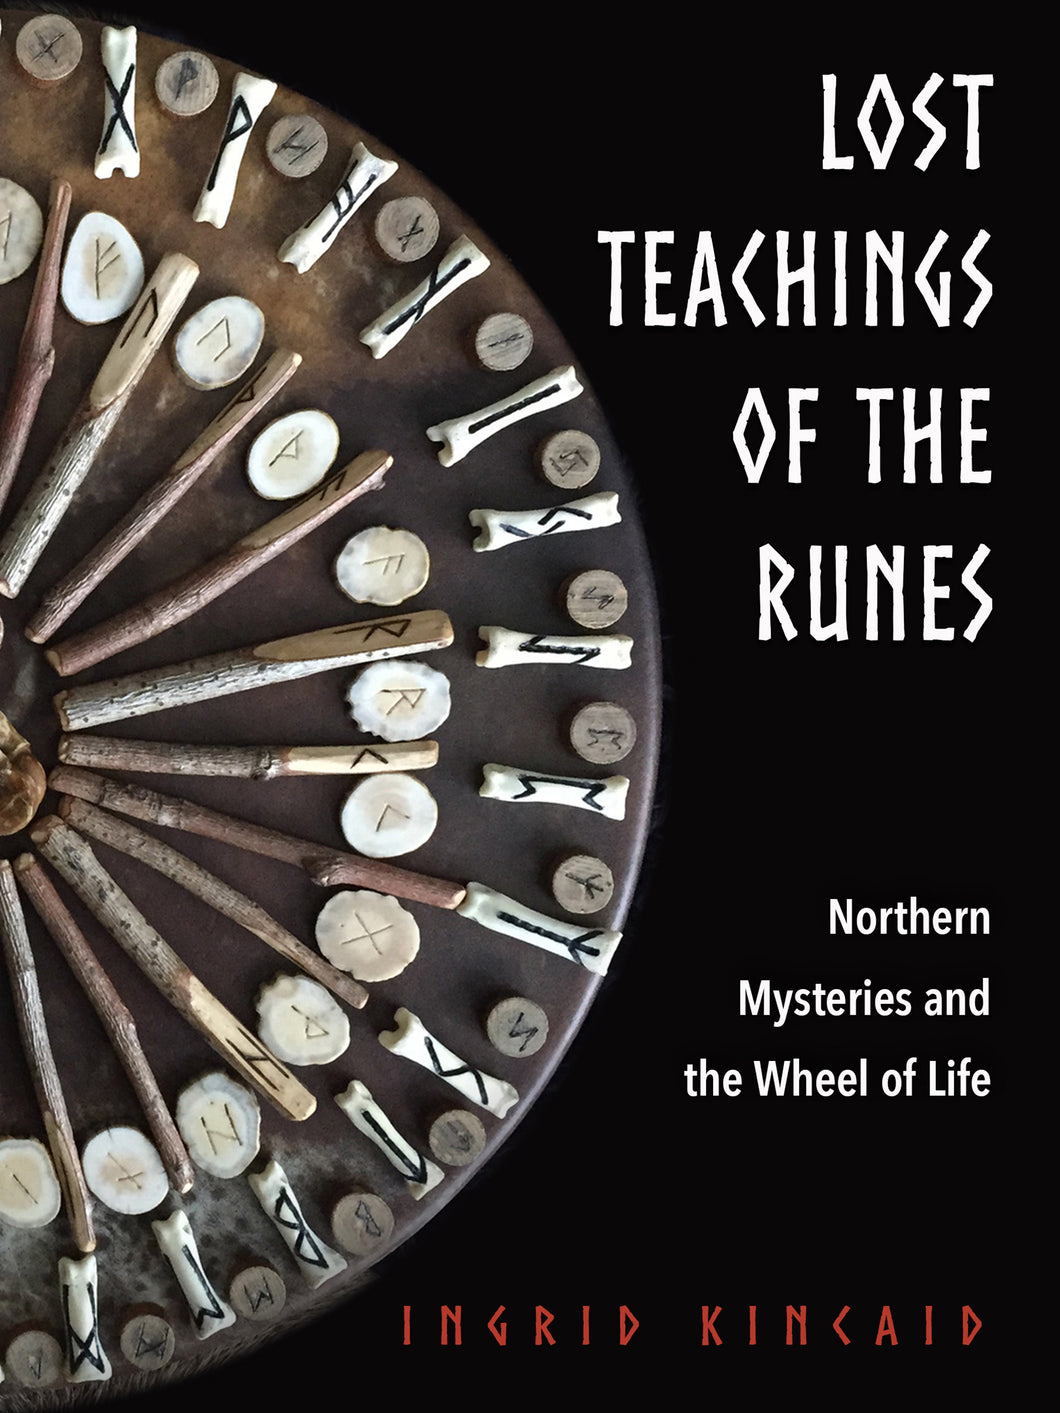 Lost Teachings of the Runes Northern Mysteries and the Wheel of Life